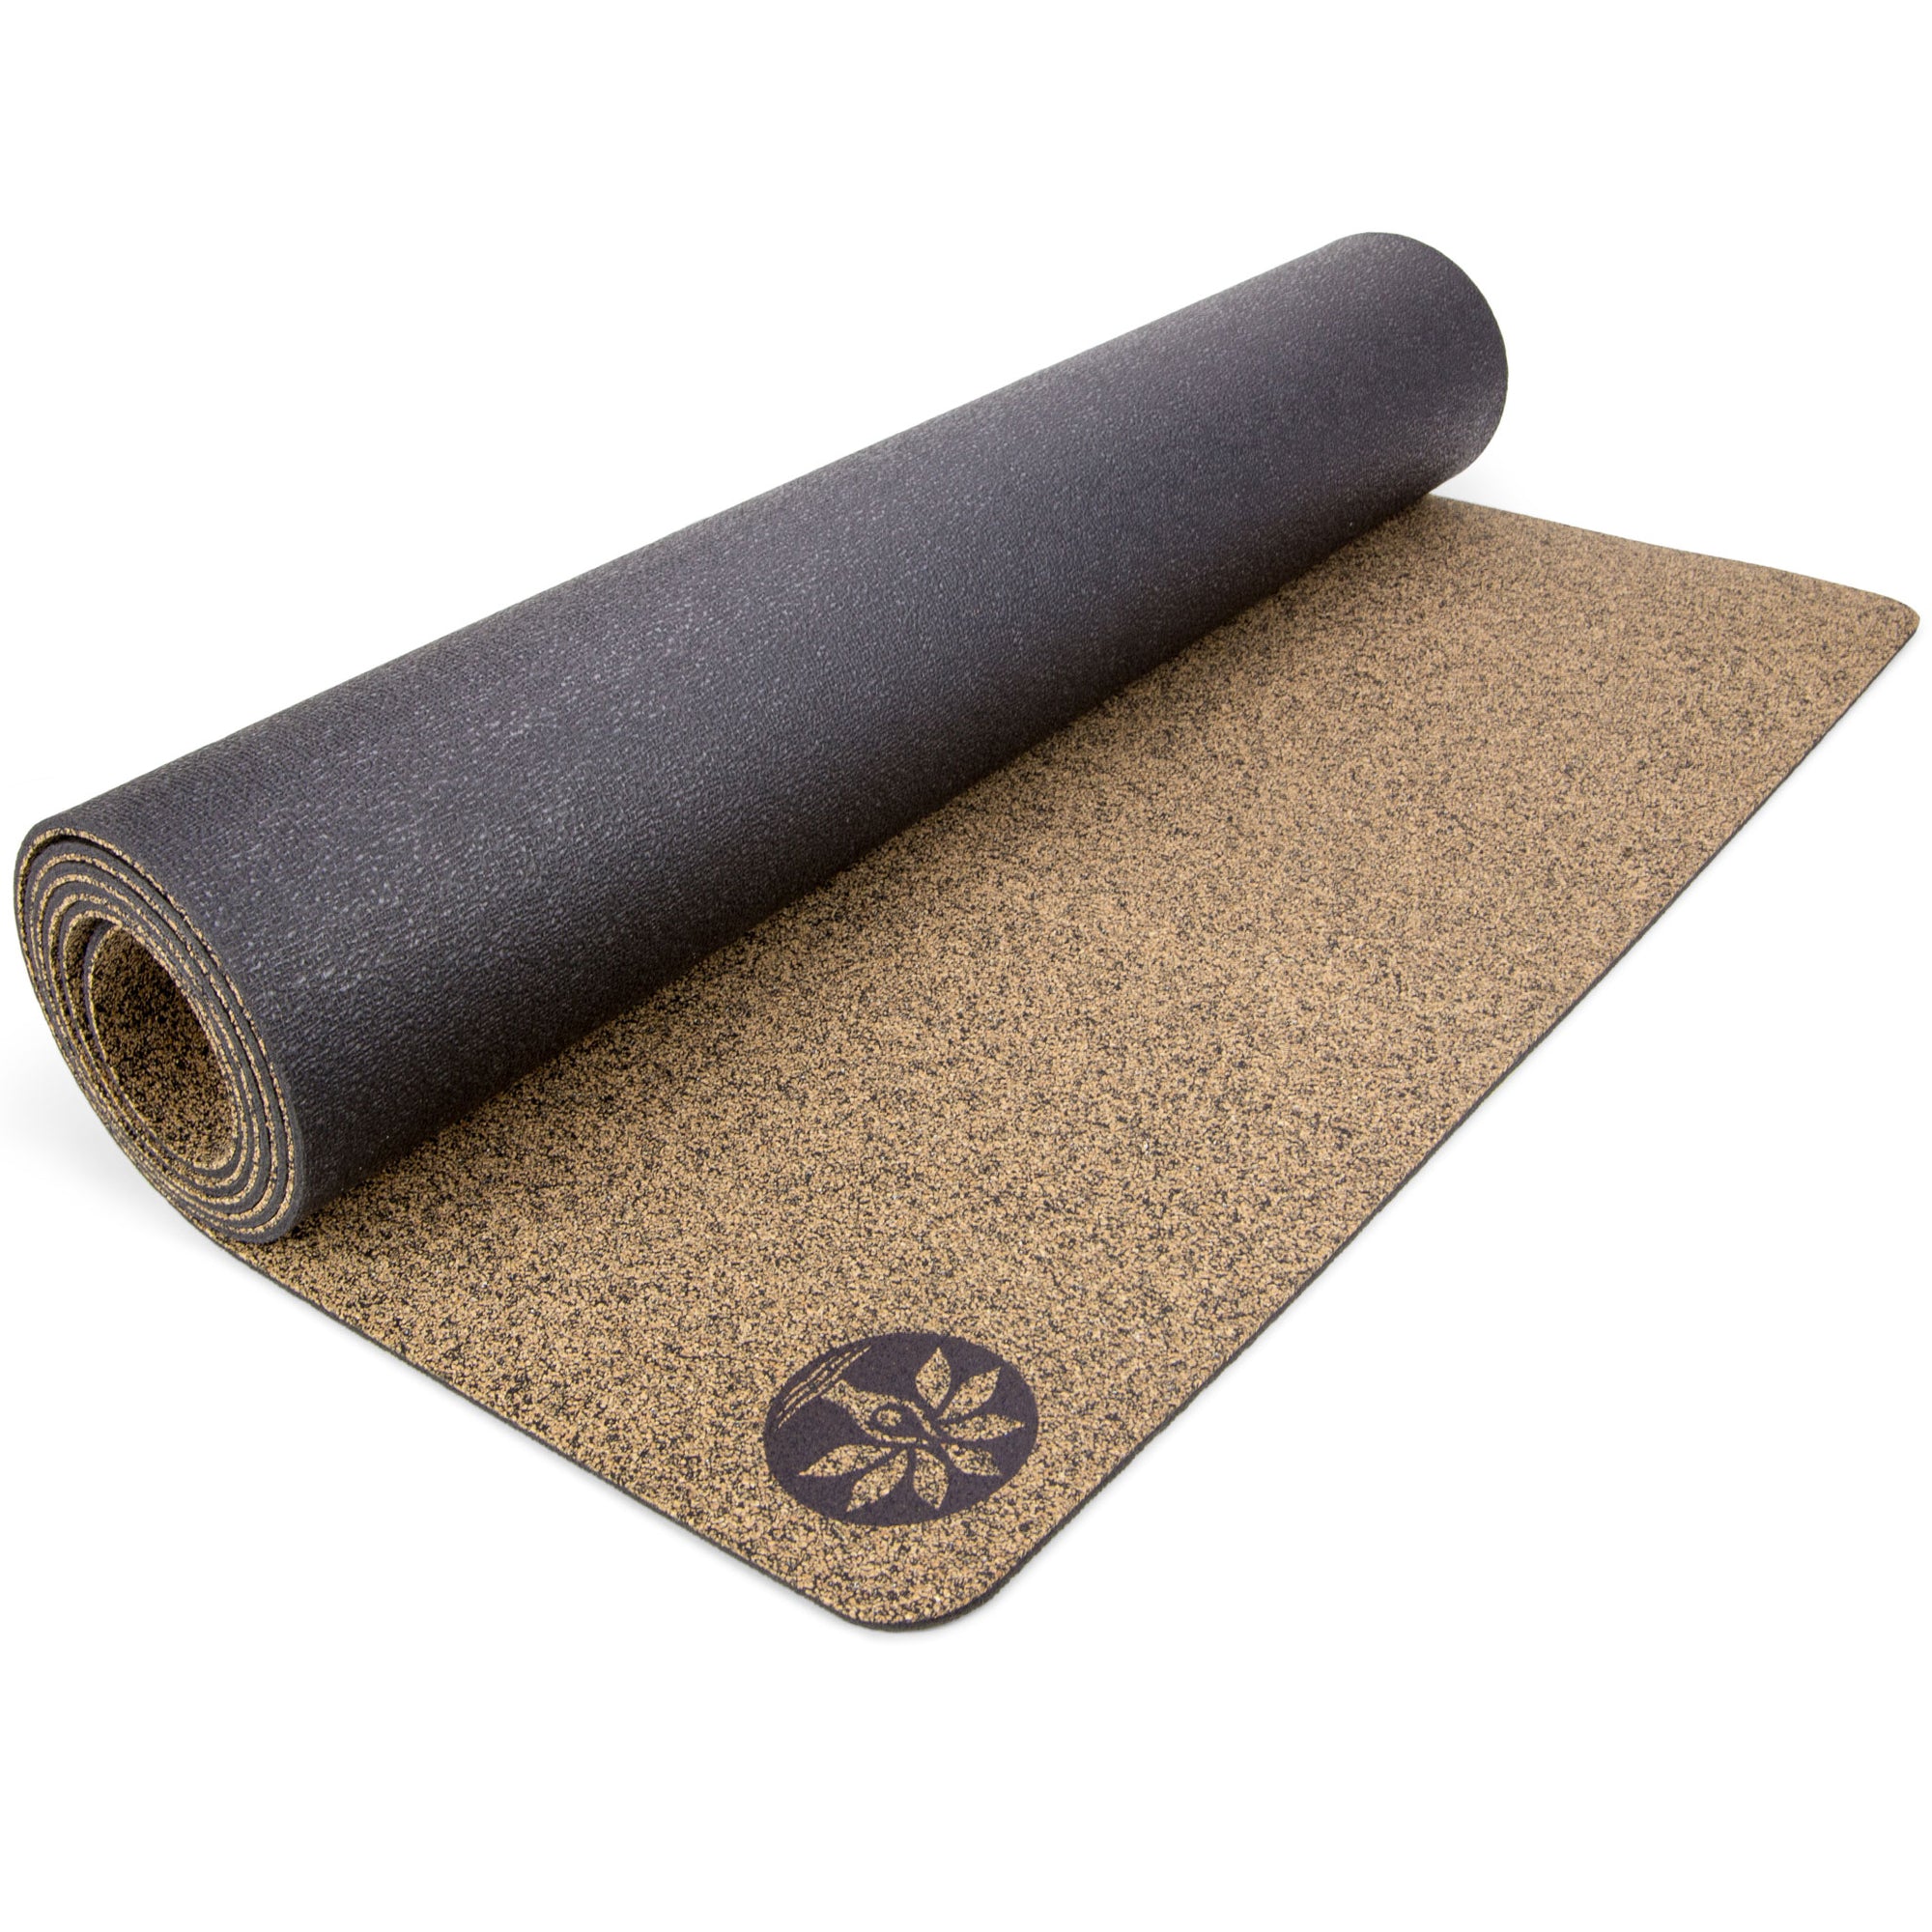 This yoga mat is under $5 on  today